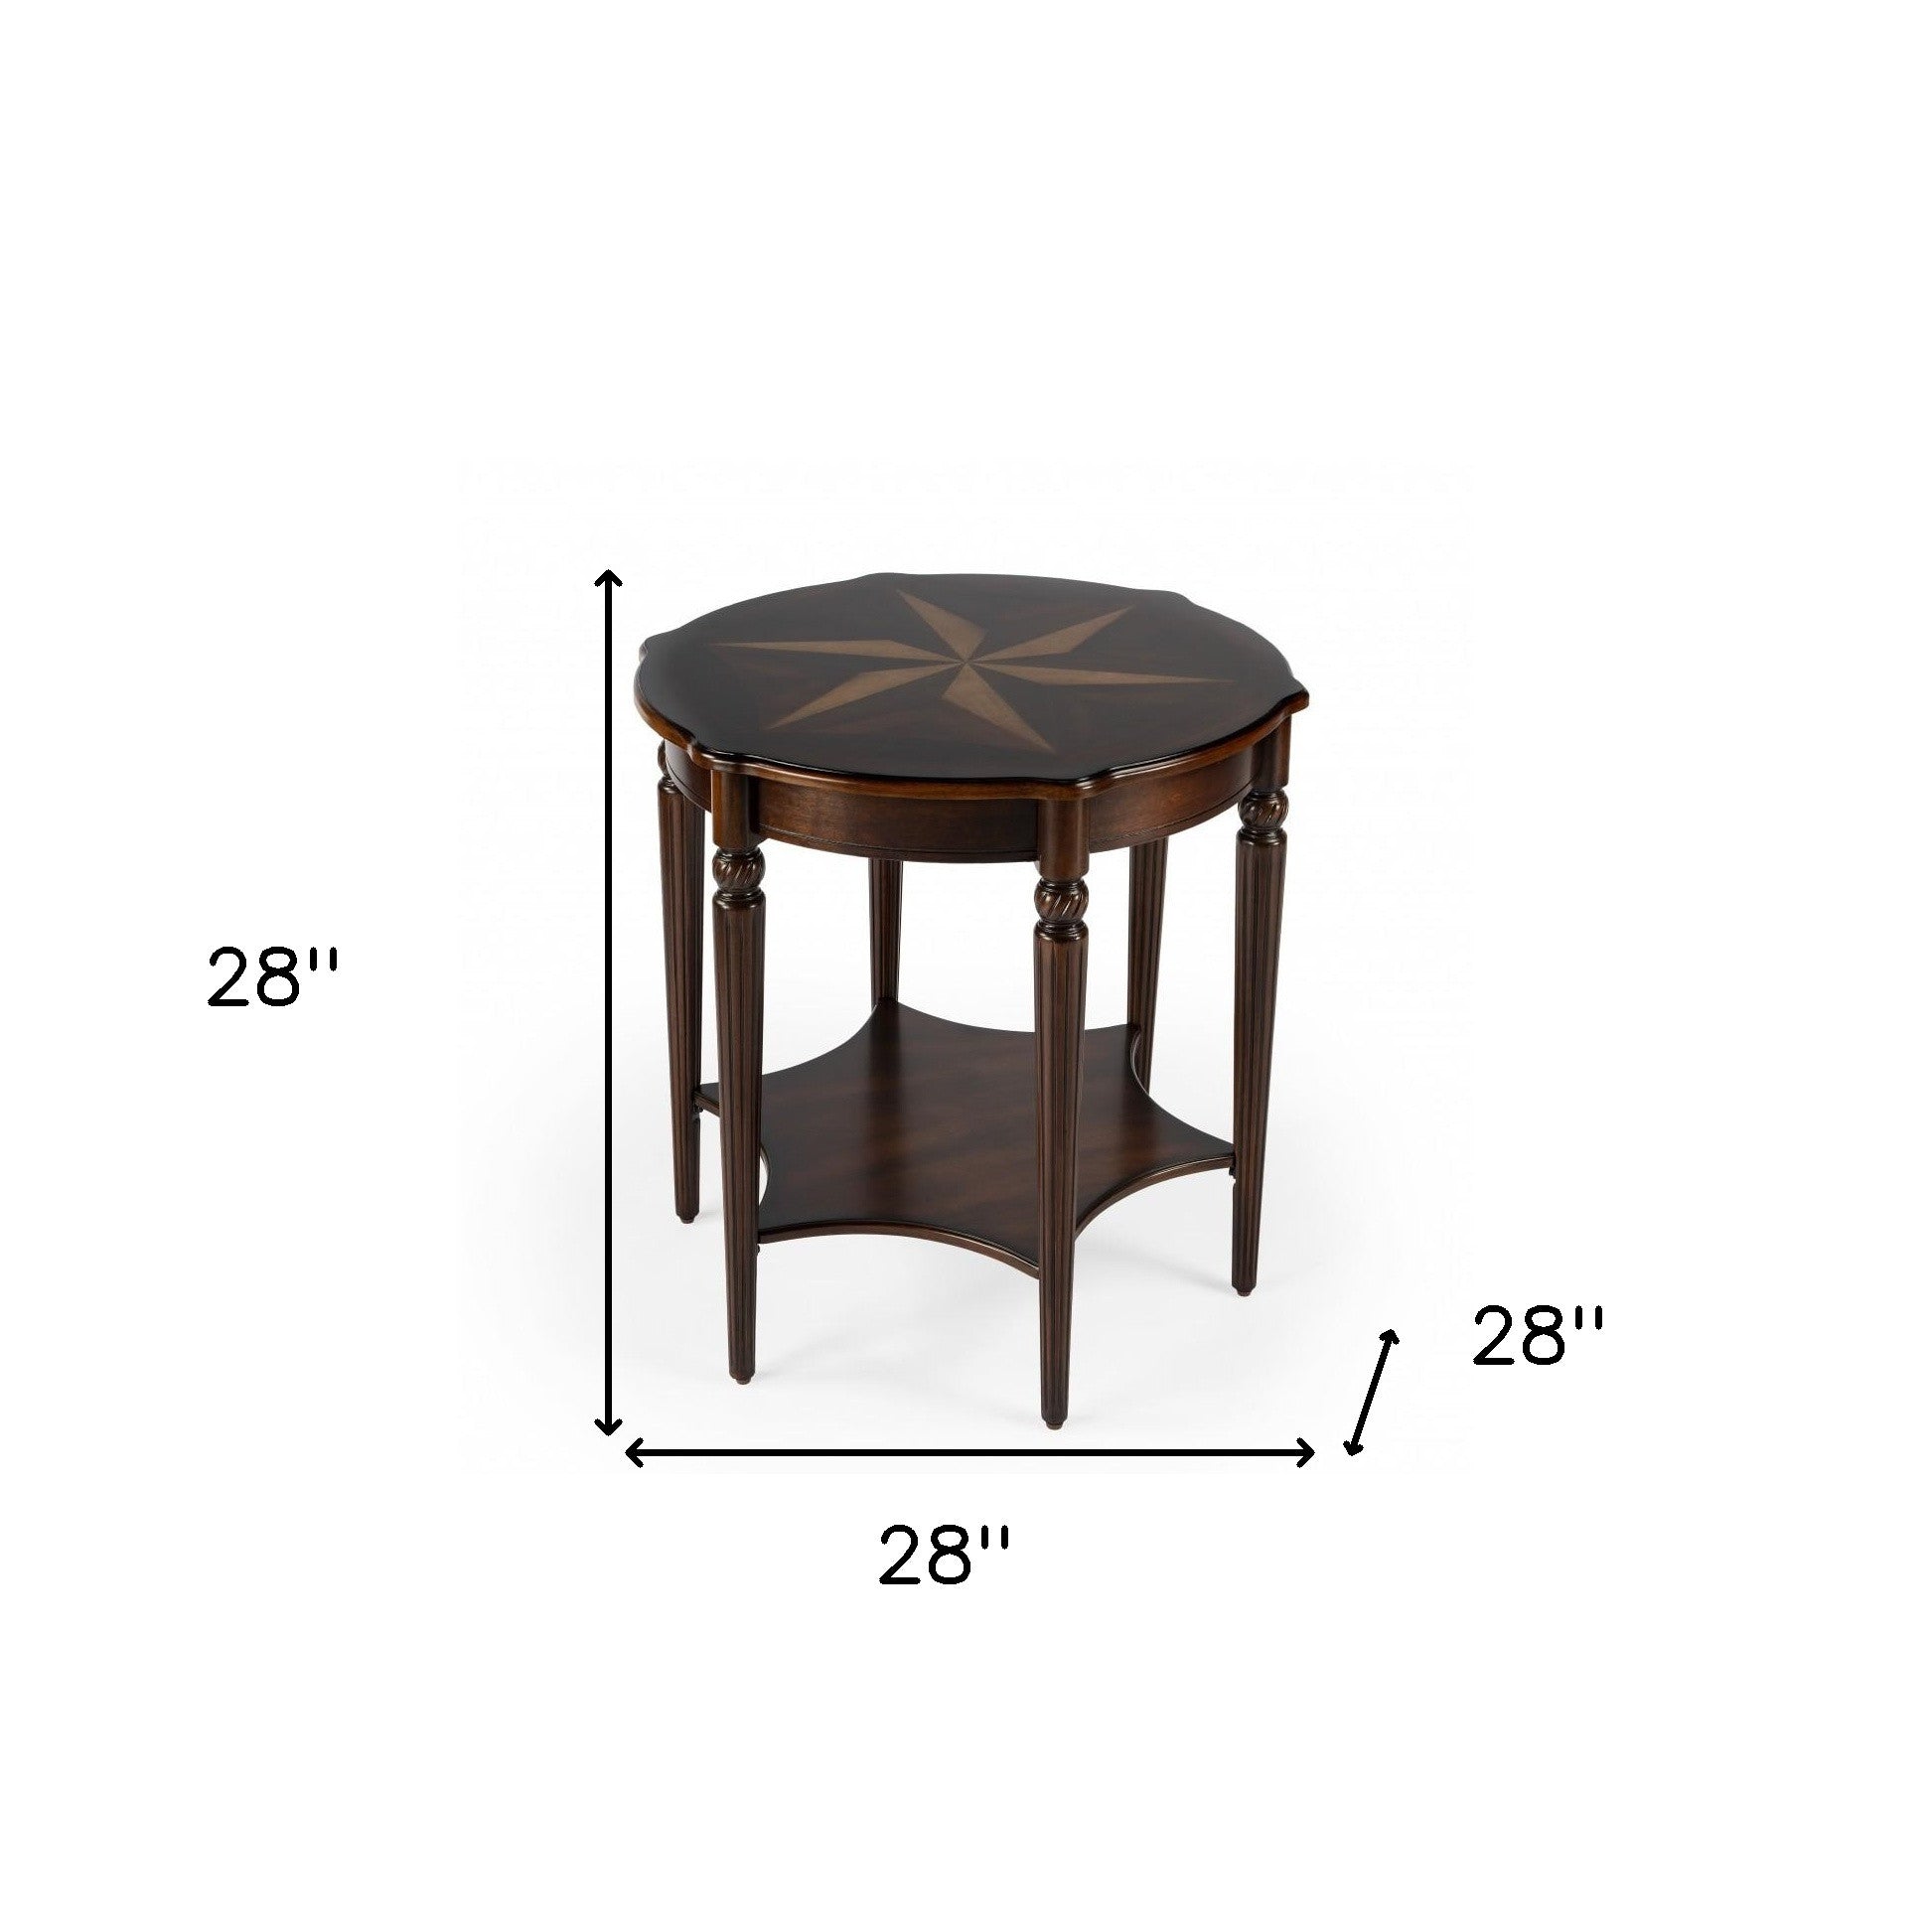 28" Brown Round Coffee Table